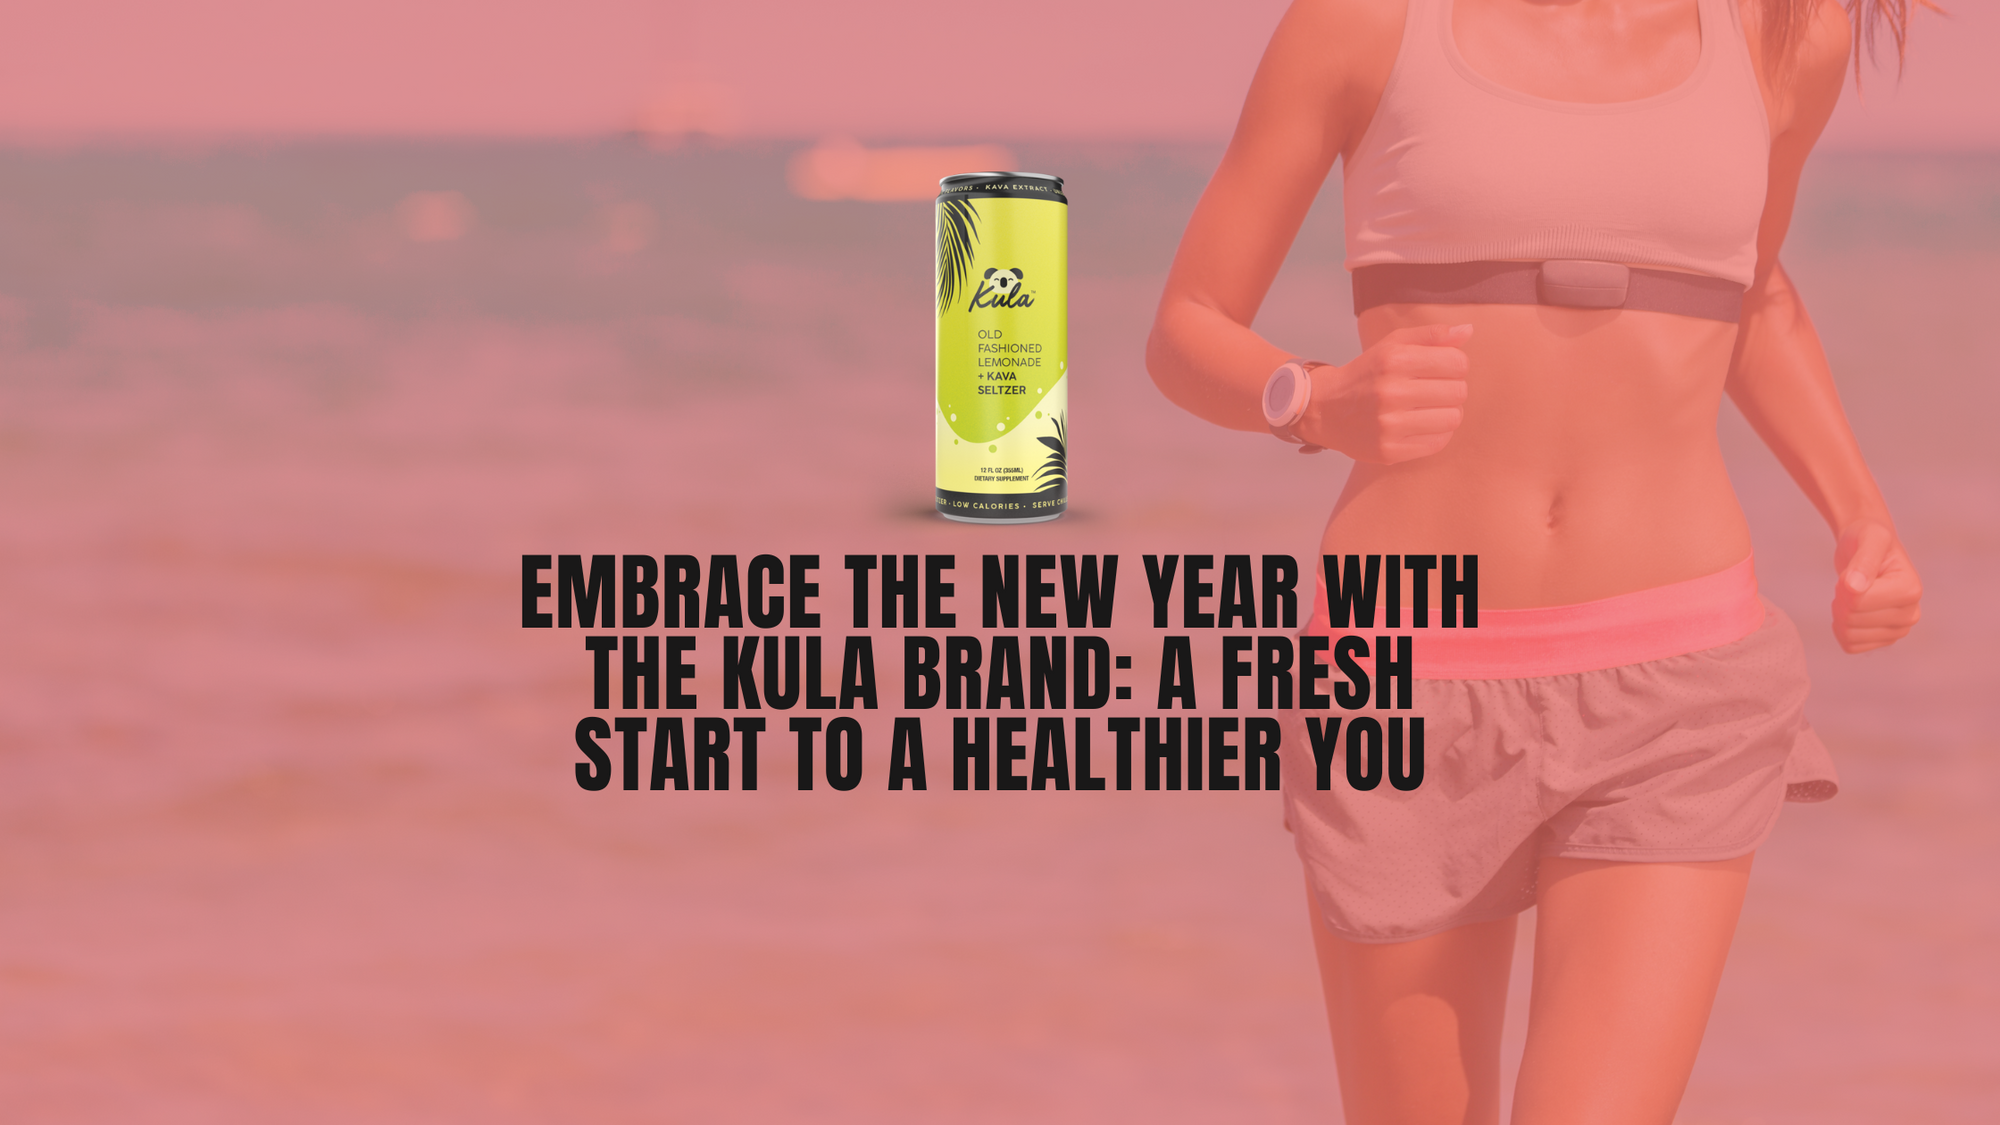 Embrace the New Year with The Kula Brand: A Fresh Start to a Healthier You